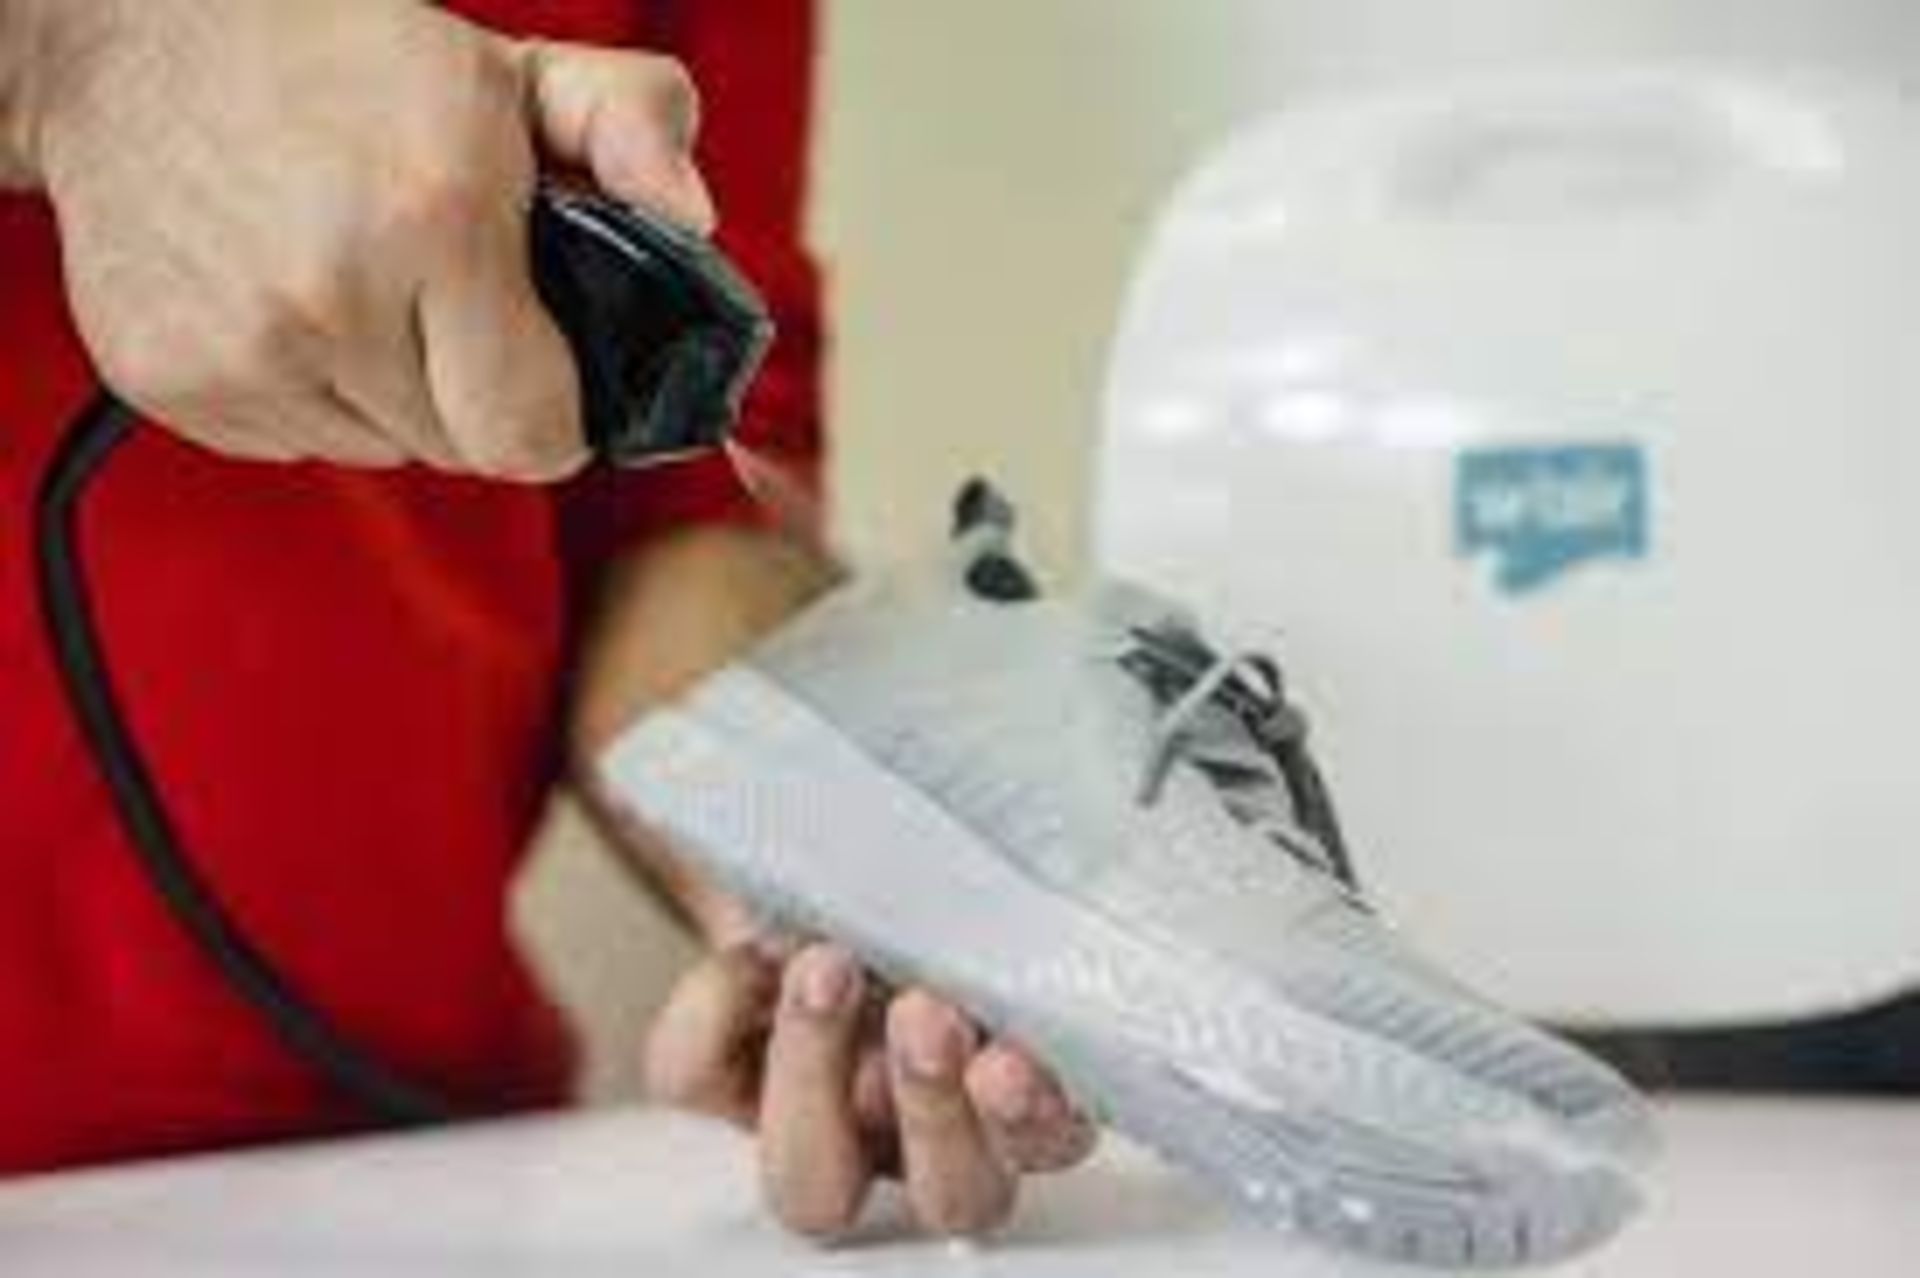 5 X BRAND NEW W'AIR SNEAKER CLEANING SYSTEMS RRP £299, The w'air uses hydrodynamic technology - Image 3 of 6